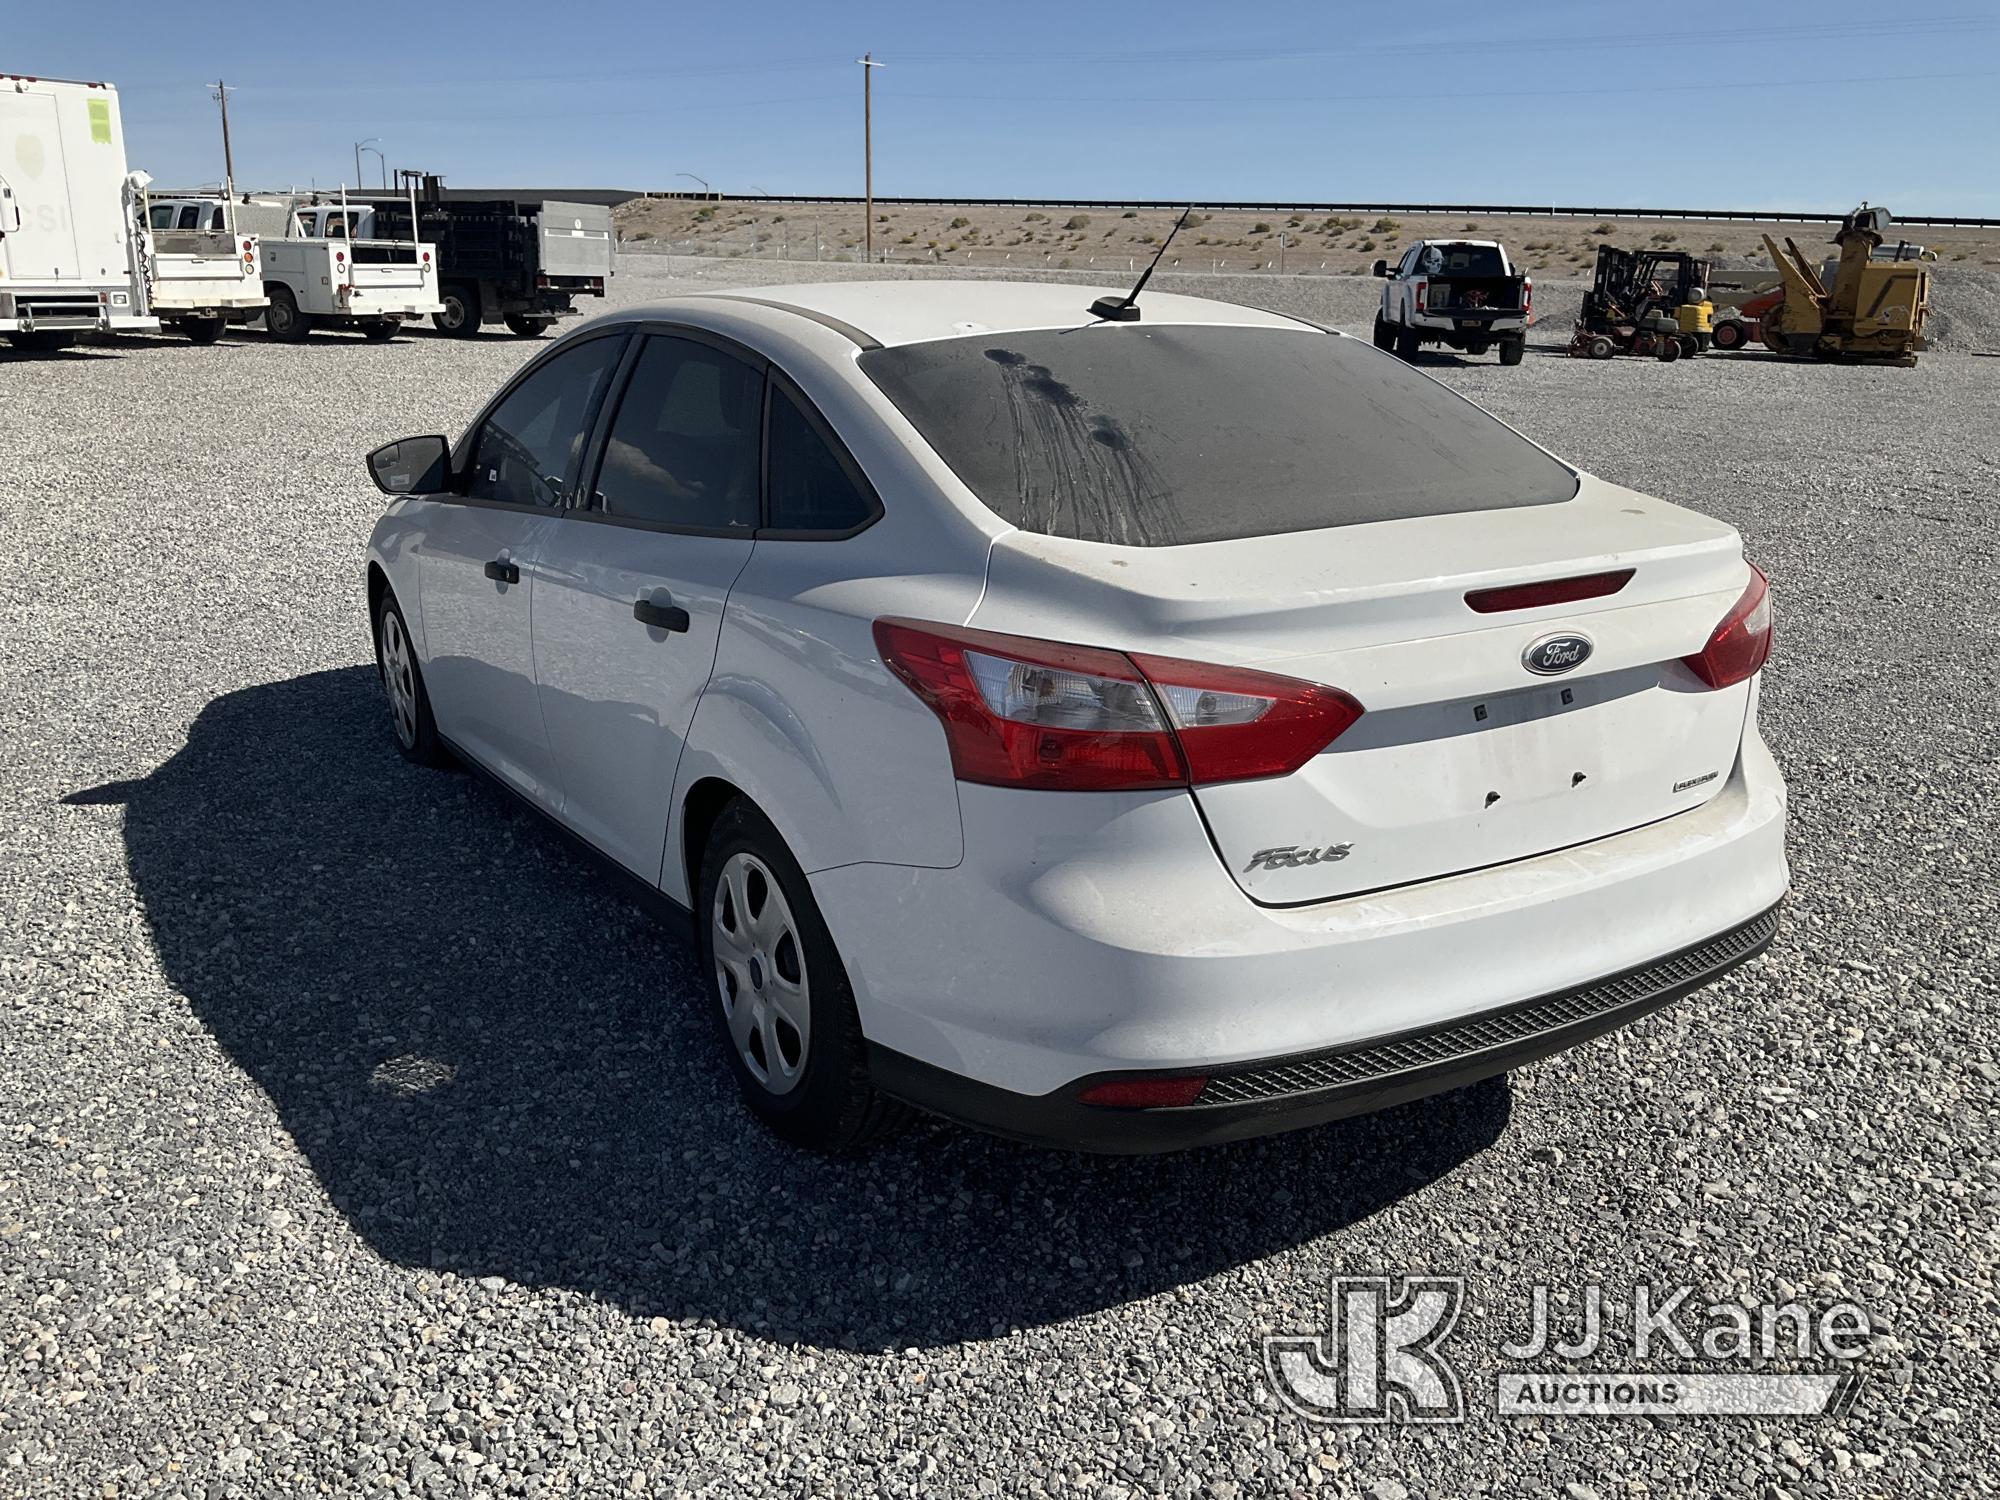 (Las Vegas, NV) 2014 Ford Focus Check Engine Light On, Bad Transmission, Bad Front Tire Jump To Star